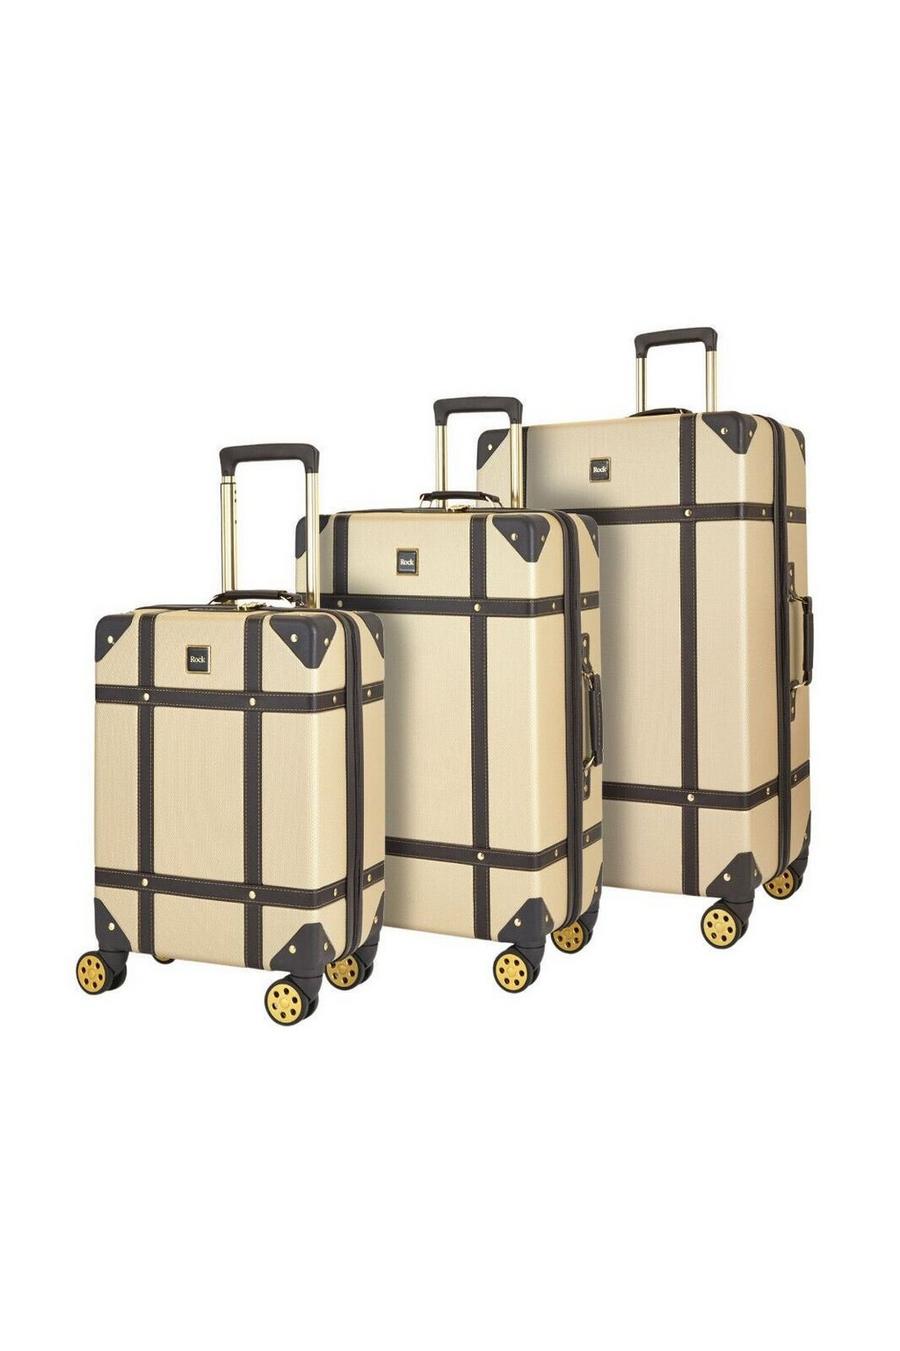 Gold Vintage Hard Shell Luggage Suitcase Trunk Cabin Travel Bags Set Of 3